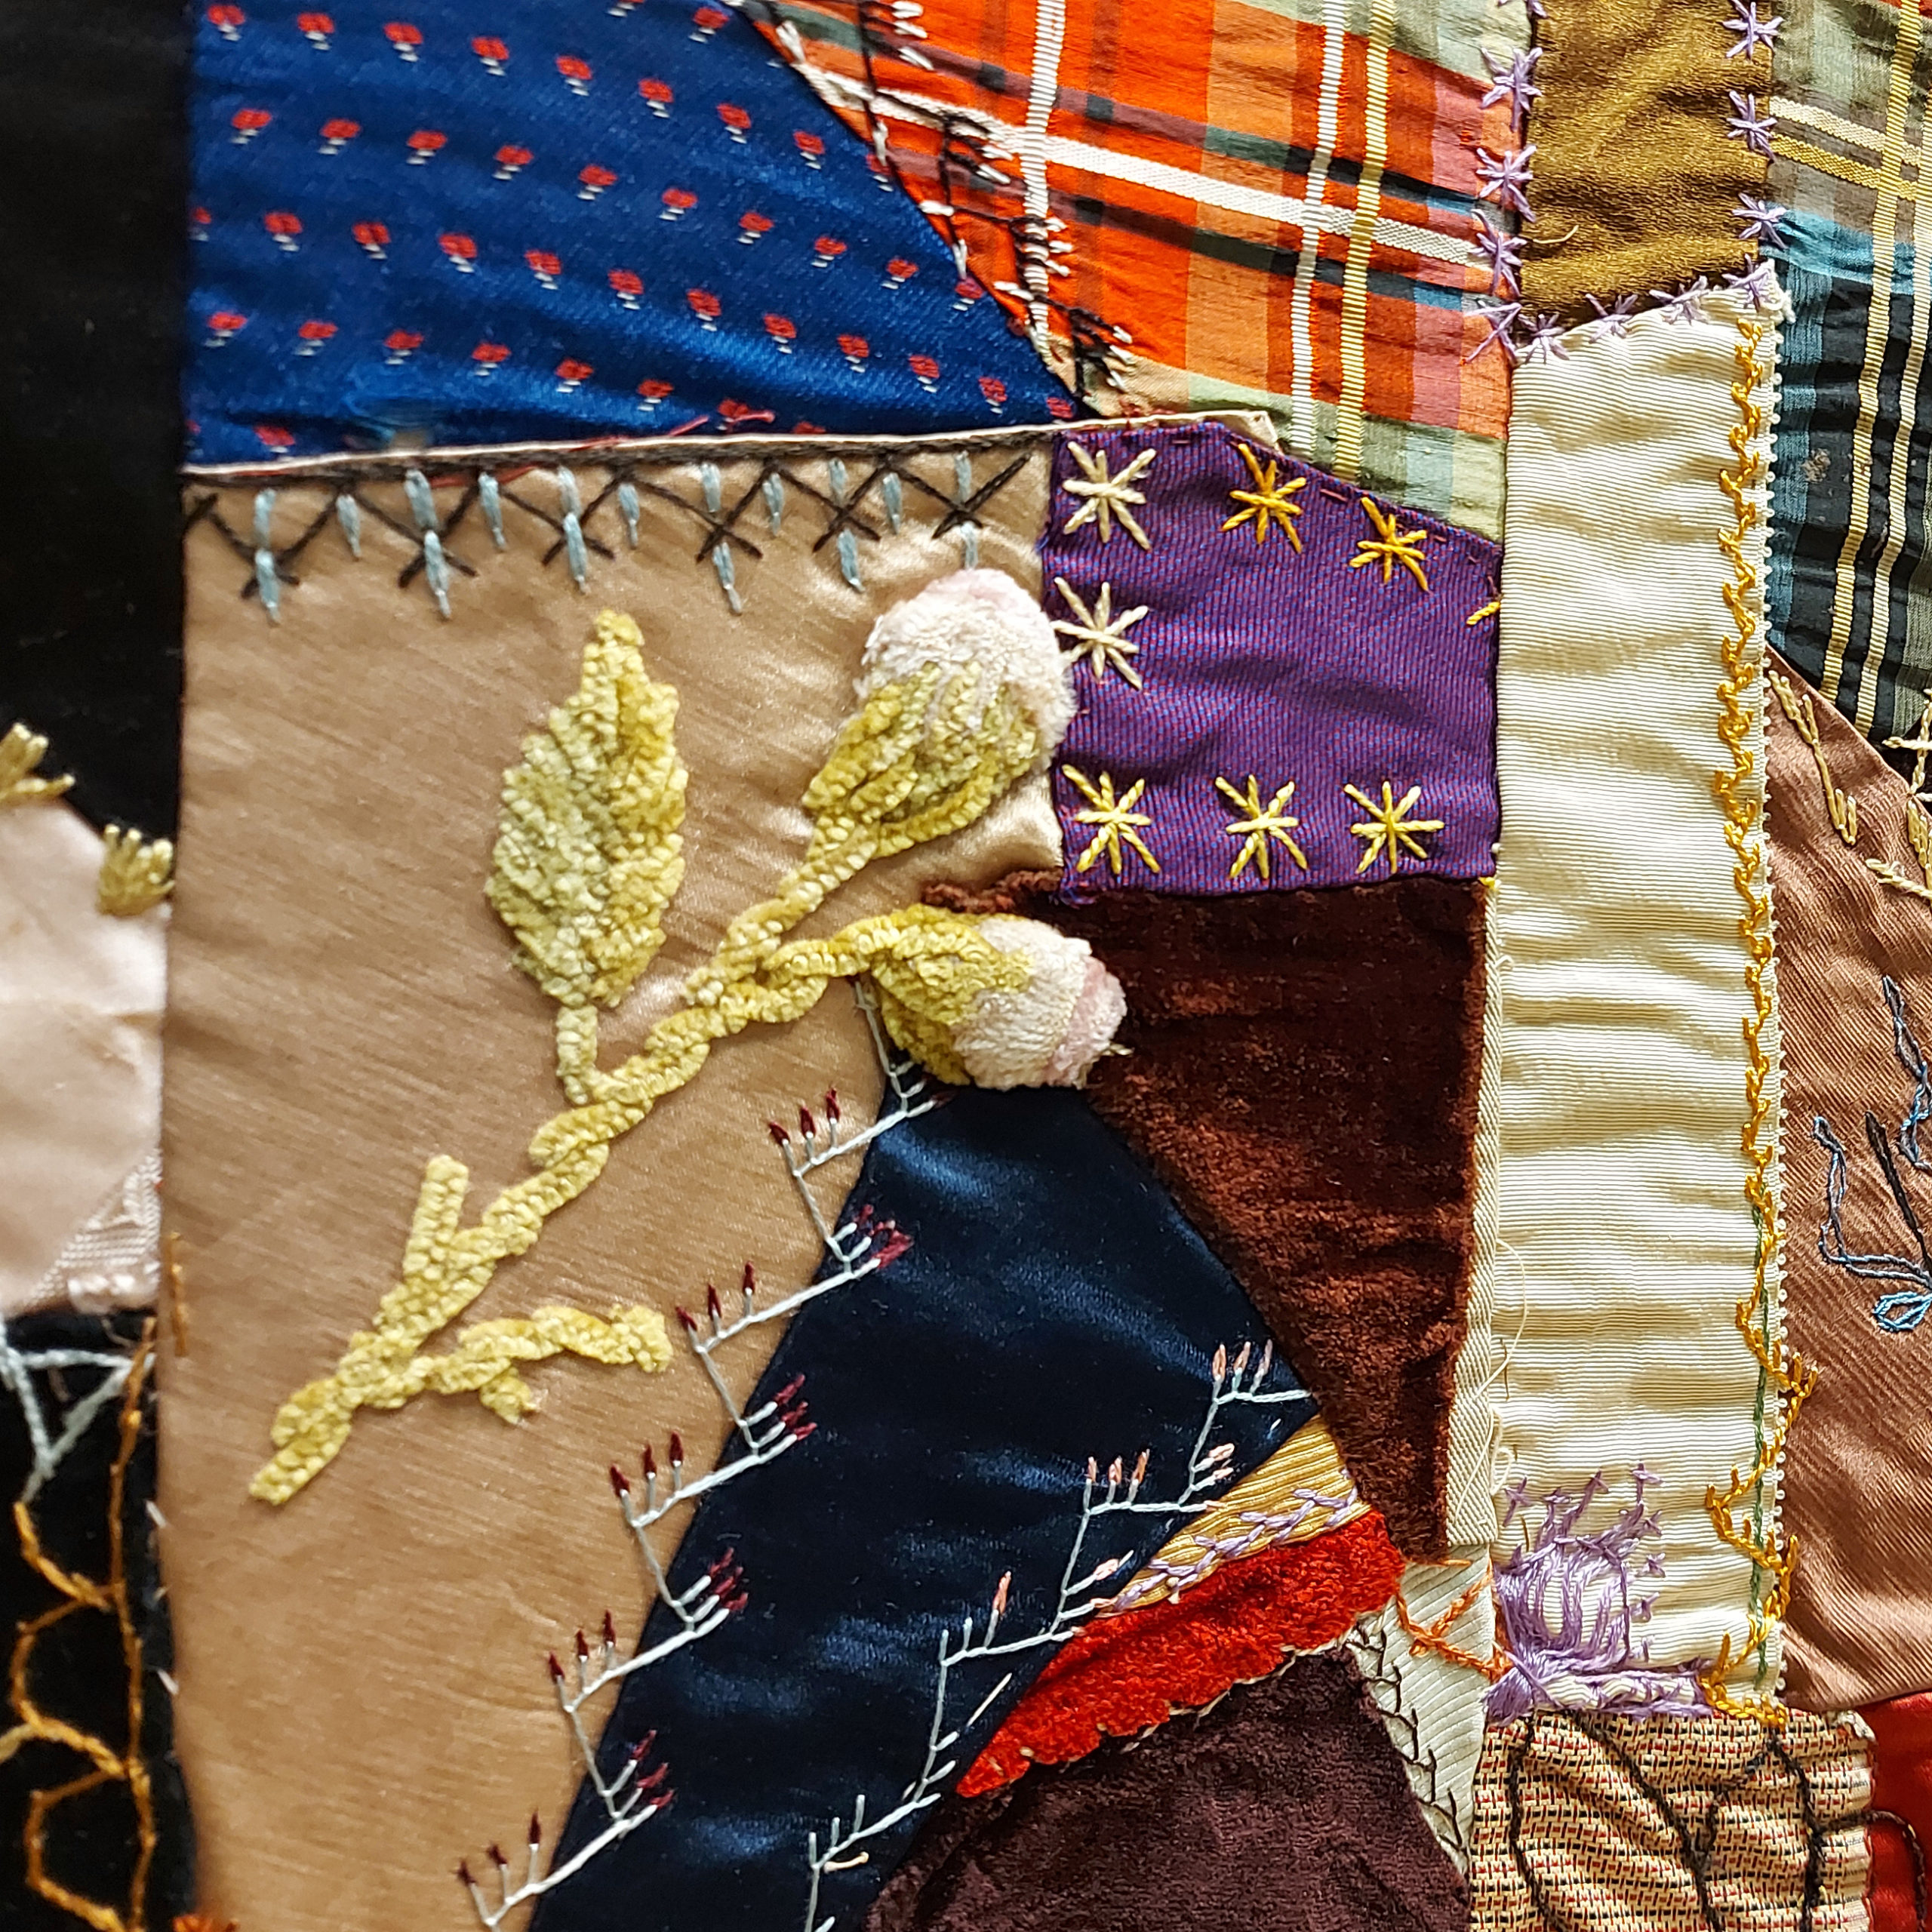 close up of stitching and fabrication of a crazy quilt